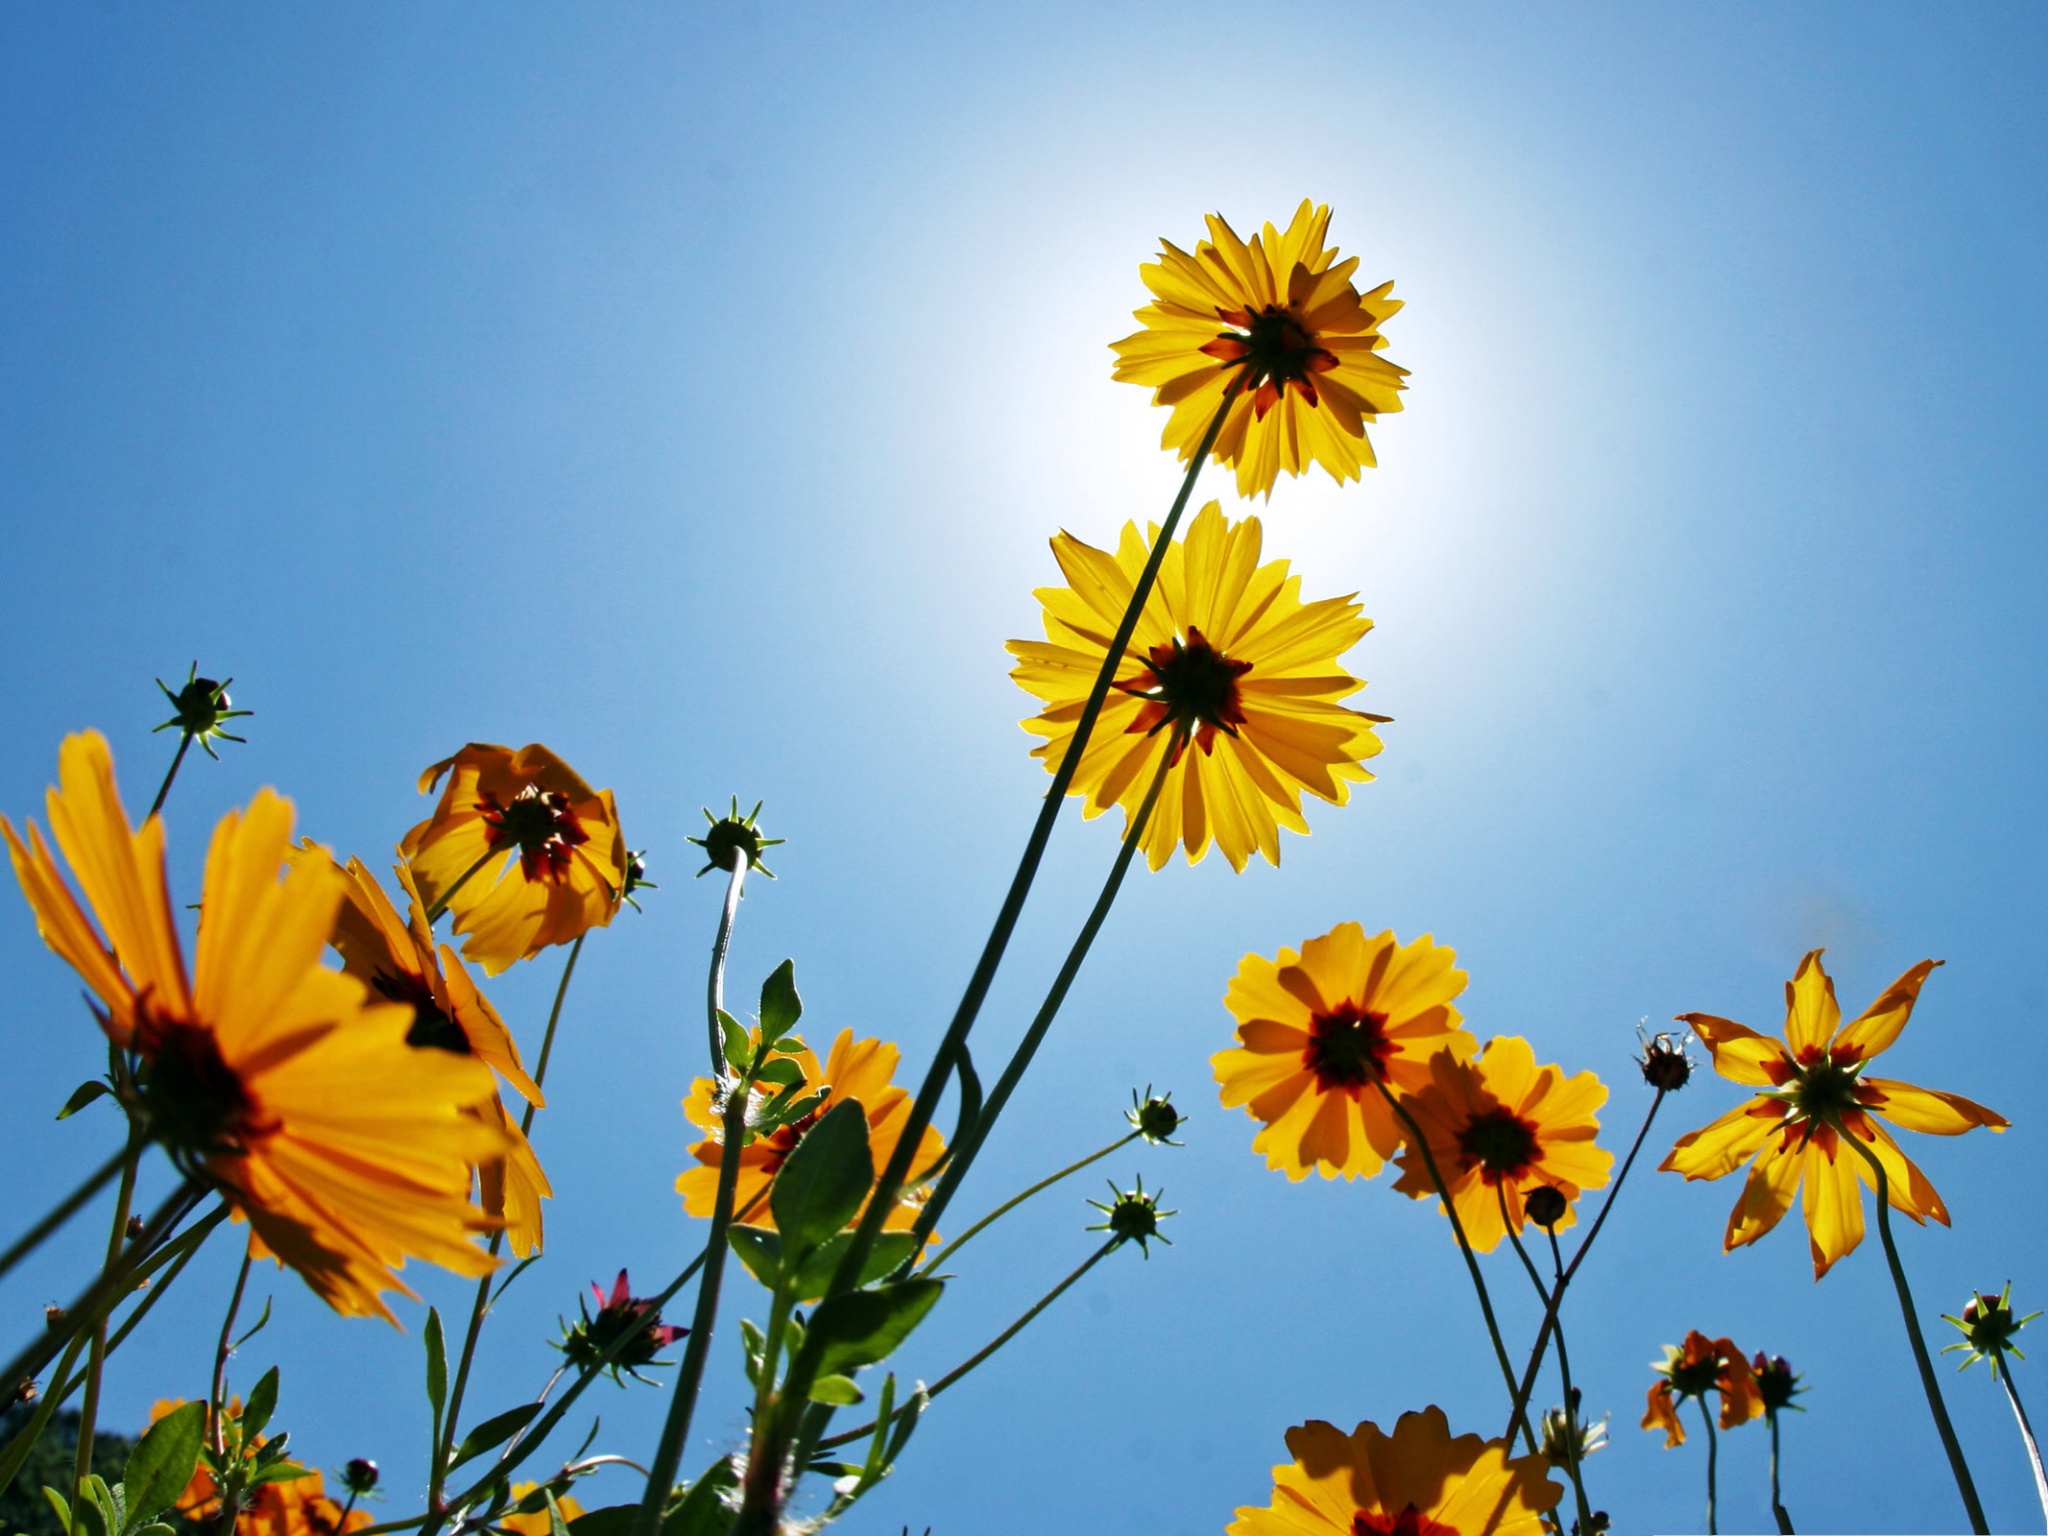 http://74211.com/wallpaper/picture_big/Yellow-Flowers-Picture-Blooming-Little-Flower-Under-the-Blue-Sky-Amazing-Scenery.jpg